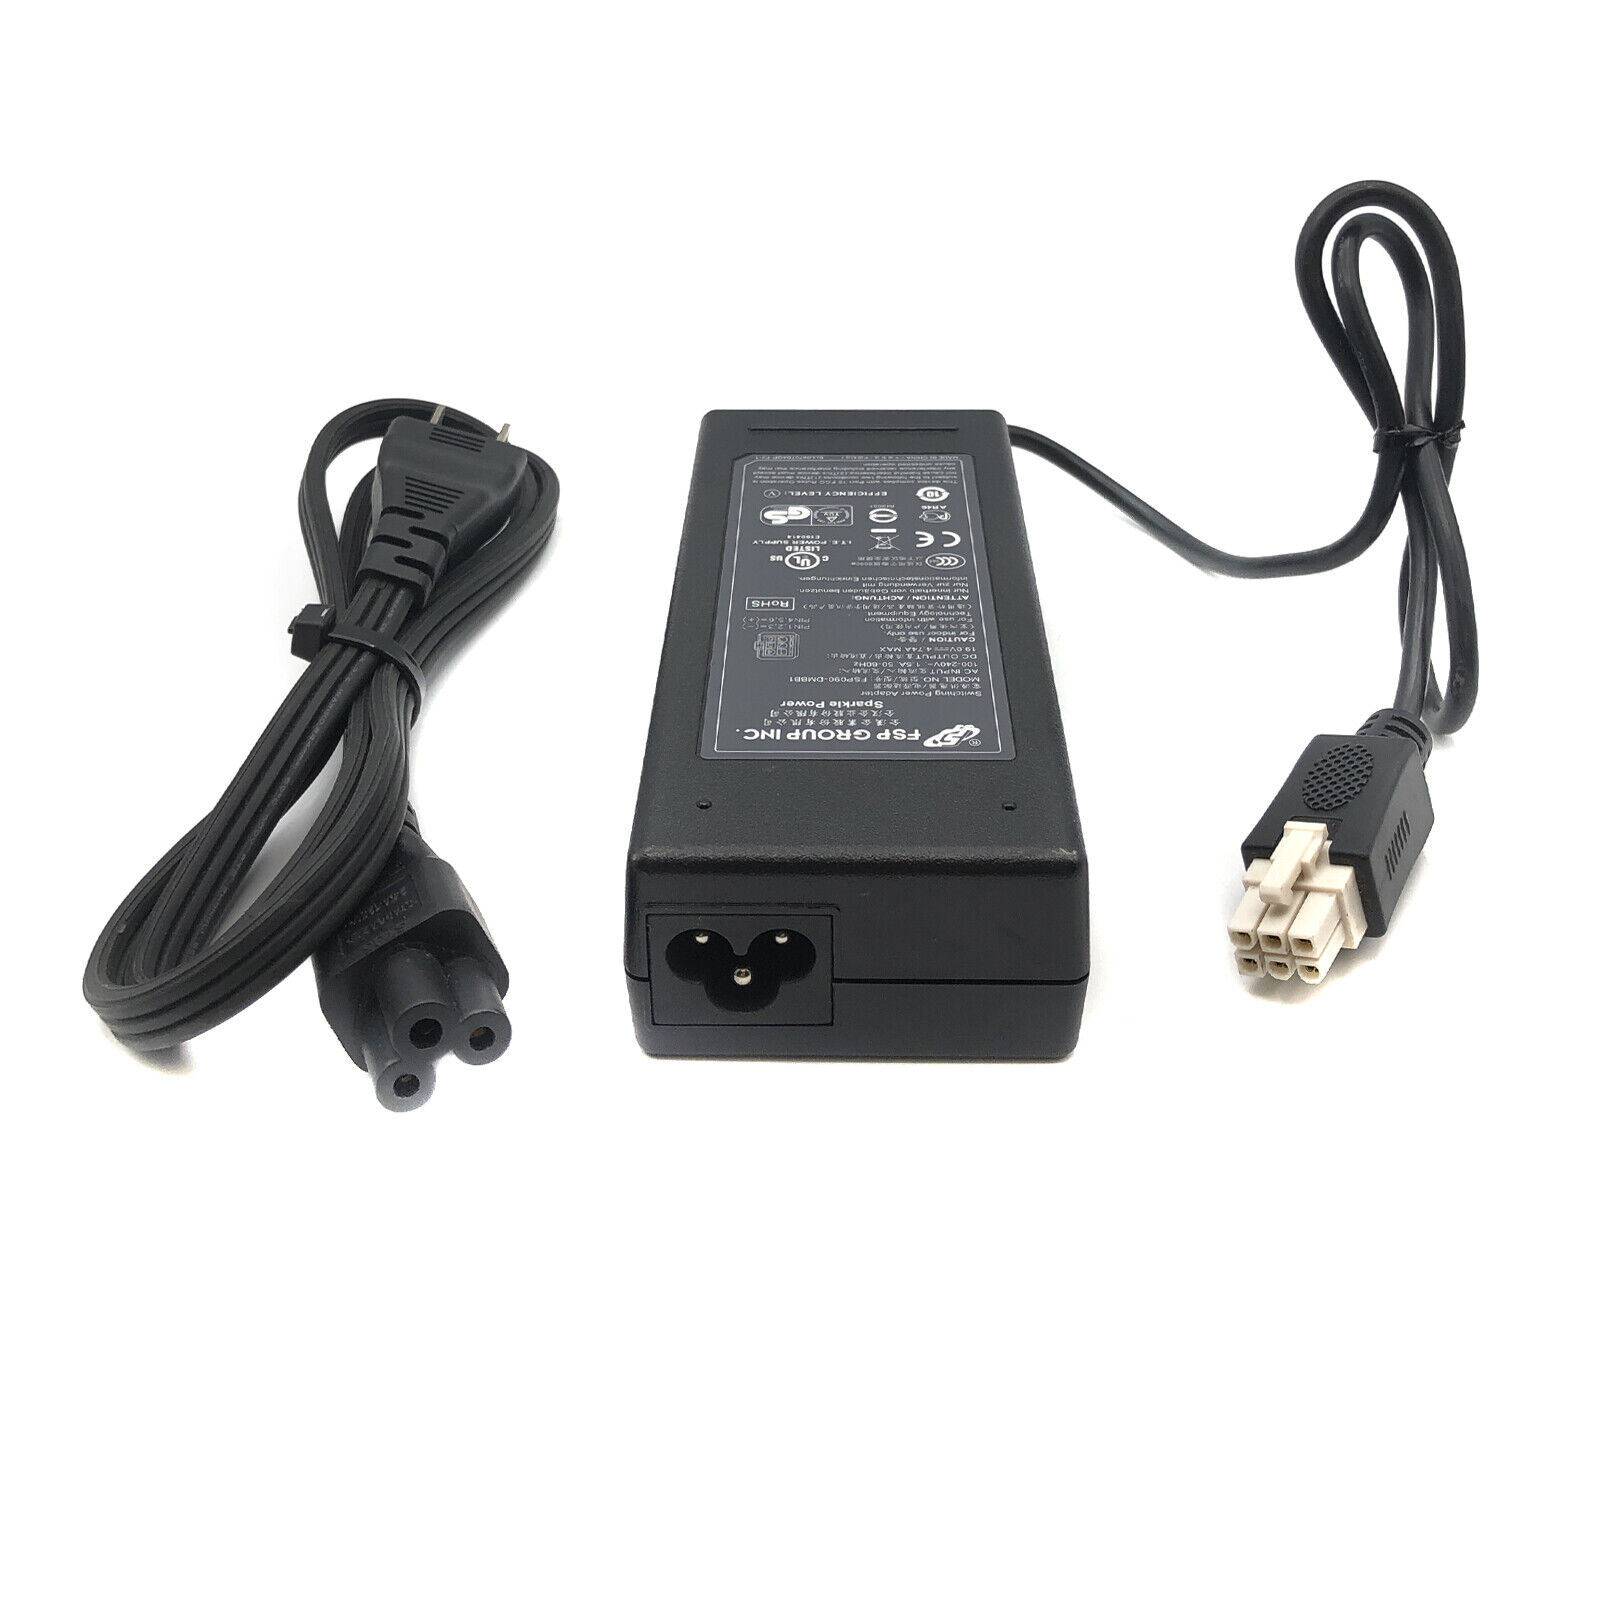 *Brand NEW*Genuine FSP 19V 4.74A 90W AC Adapter for NCR 7745 Series POS Touchscreen Terminal w/Cord Power Supp